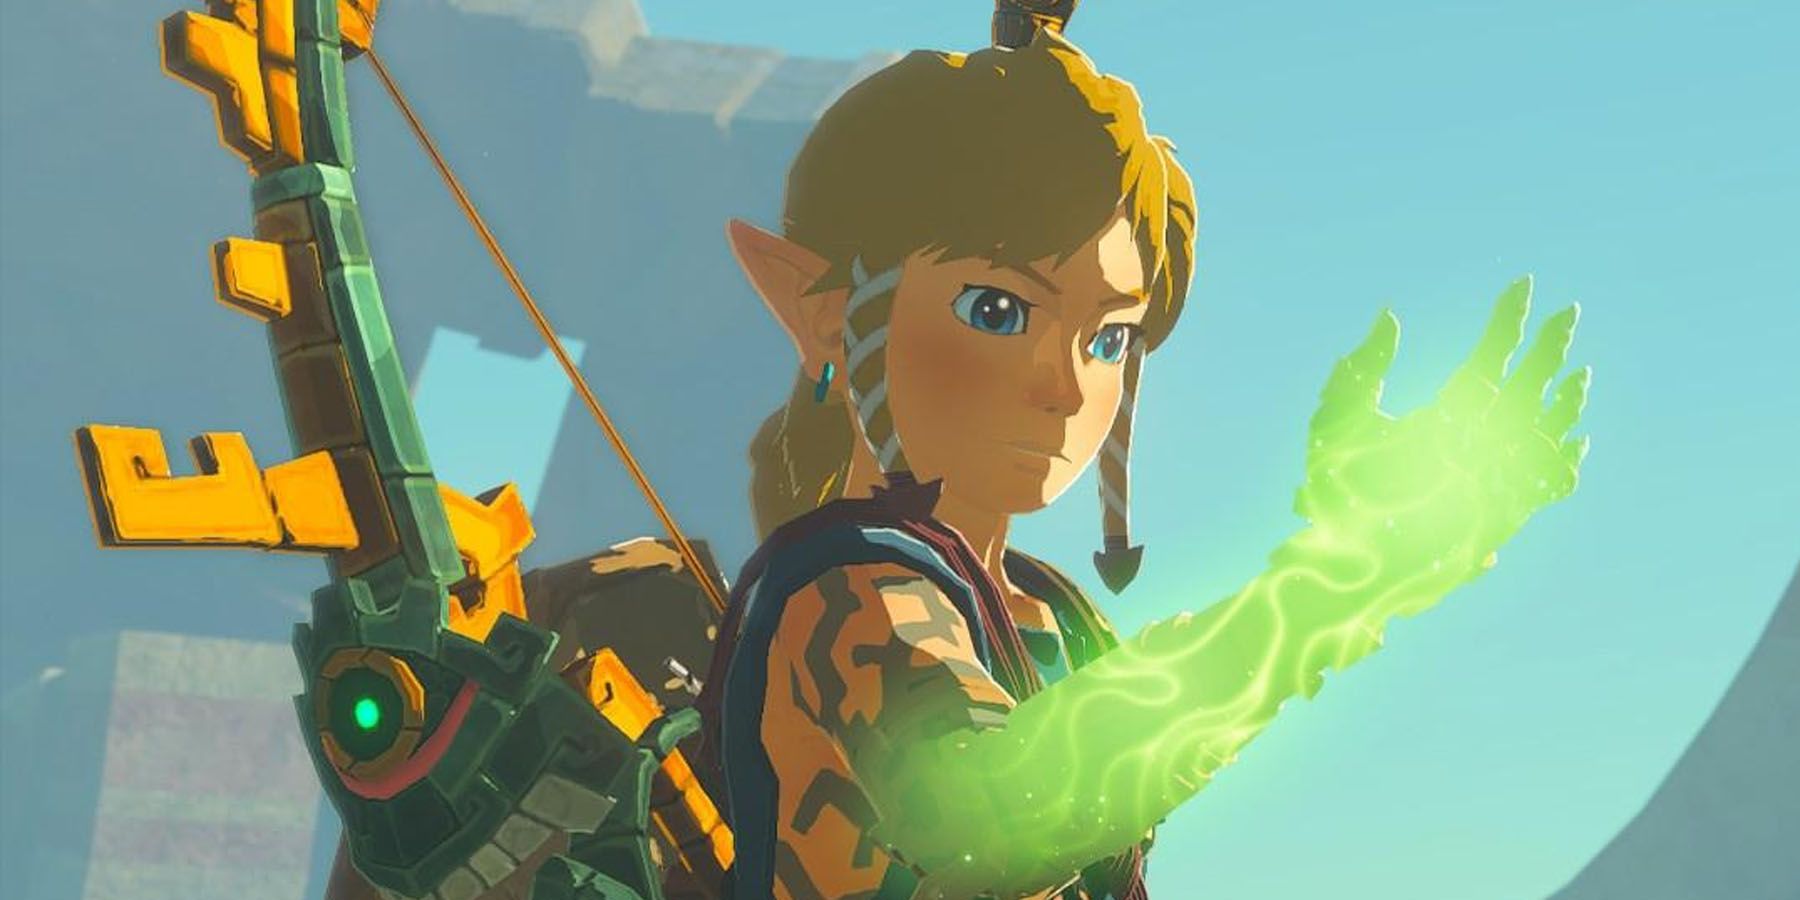 A screenshot of Link looking down at his glowing green arm in The Legend of Zelda: Tears of the Kingdom.